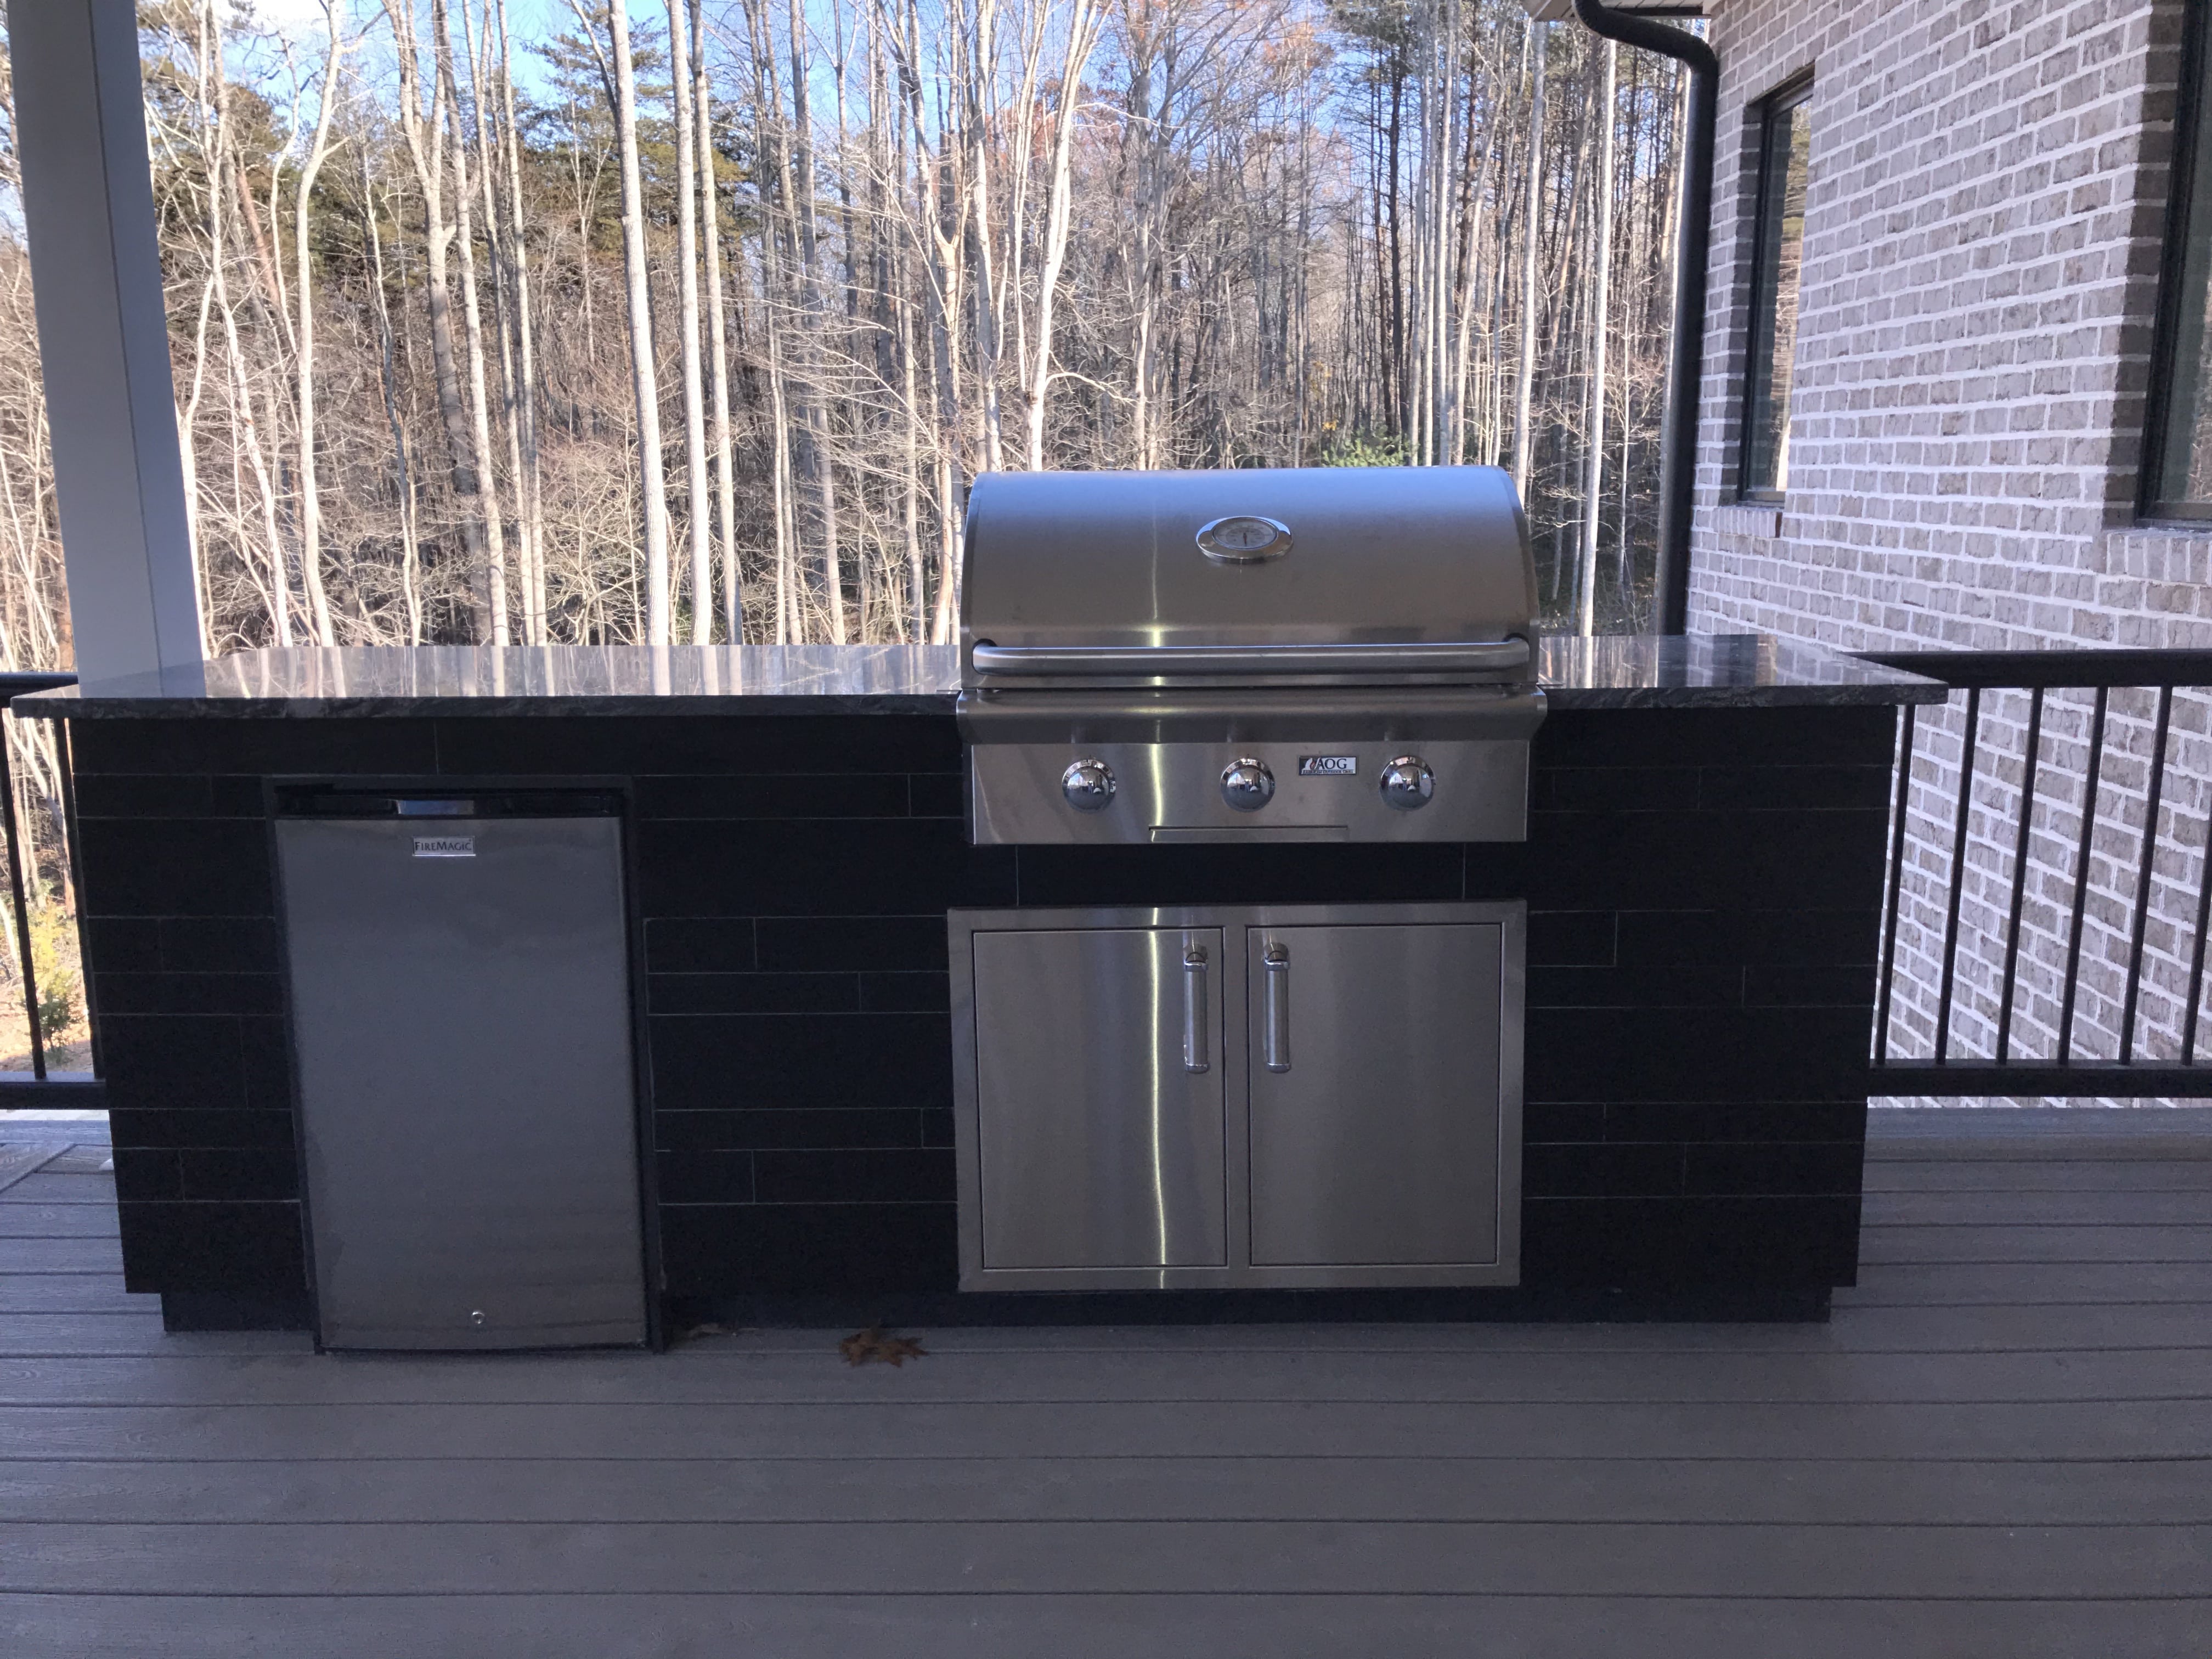 Norstone Ebony Planc Large Format Tile Being installated as the veneer on a residential outdoor kitchen project with stainless steel grill and refrigerator